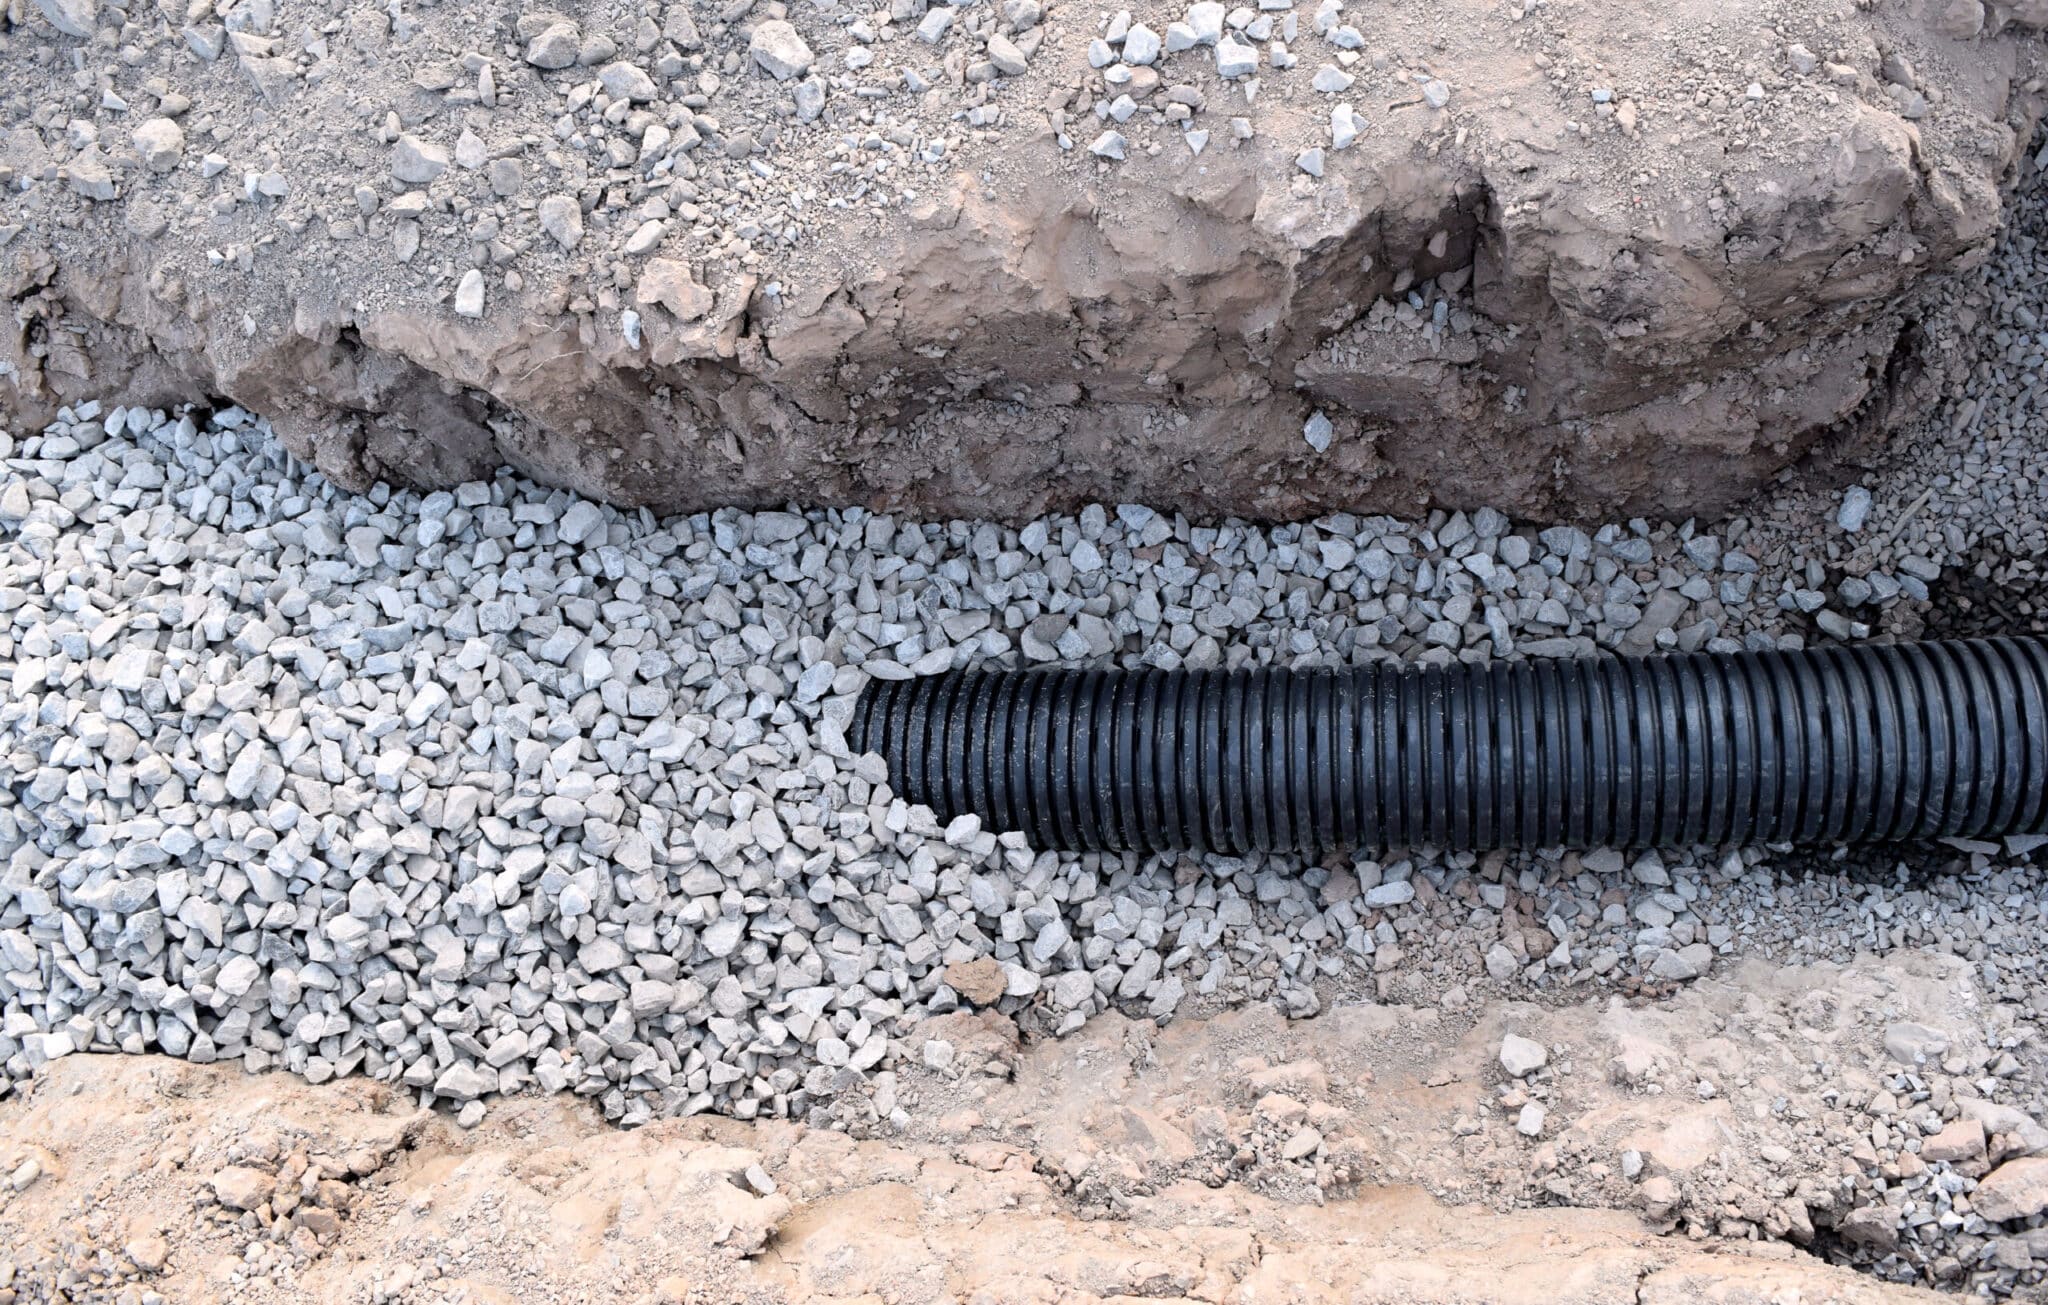 Buried Sewer Line in Road Construction Watermain Tubing Piping W